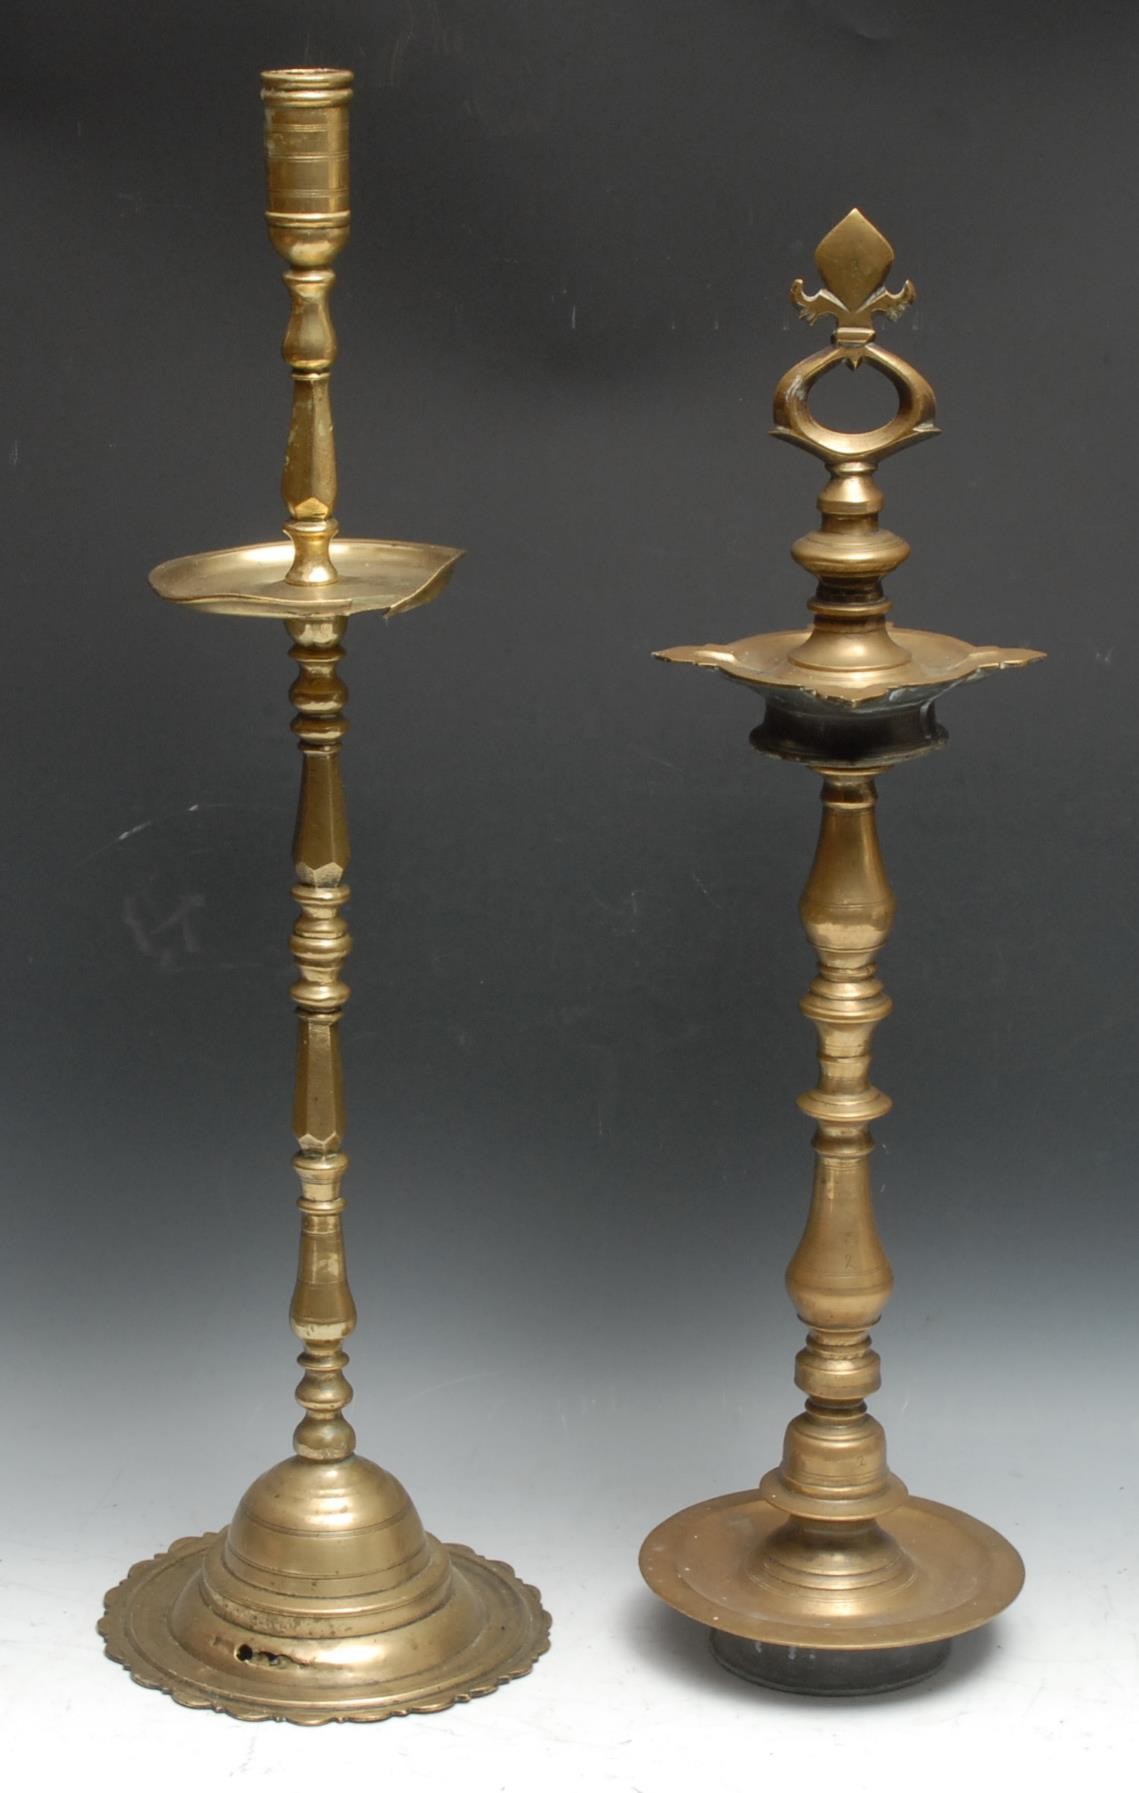 A large Indian brass candlestick, cylindrical sconce above a broad drip pan, domed lotus shaped - Image 2 of 2